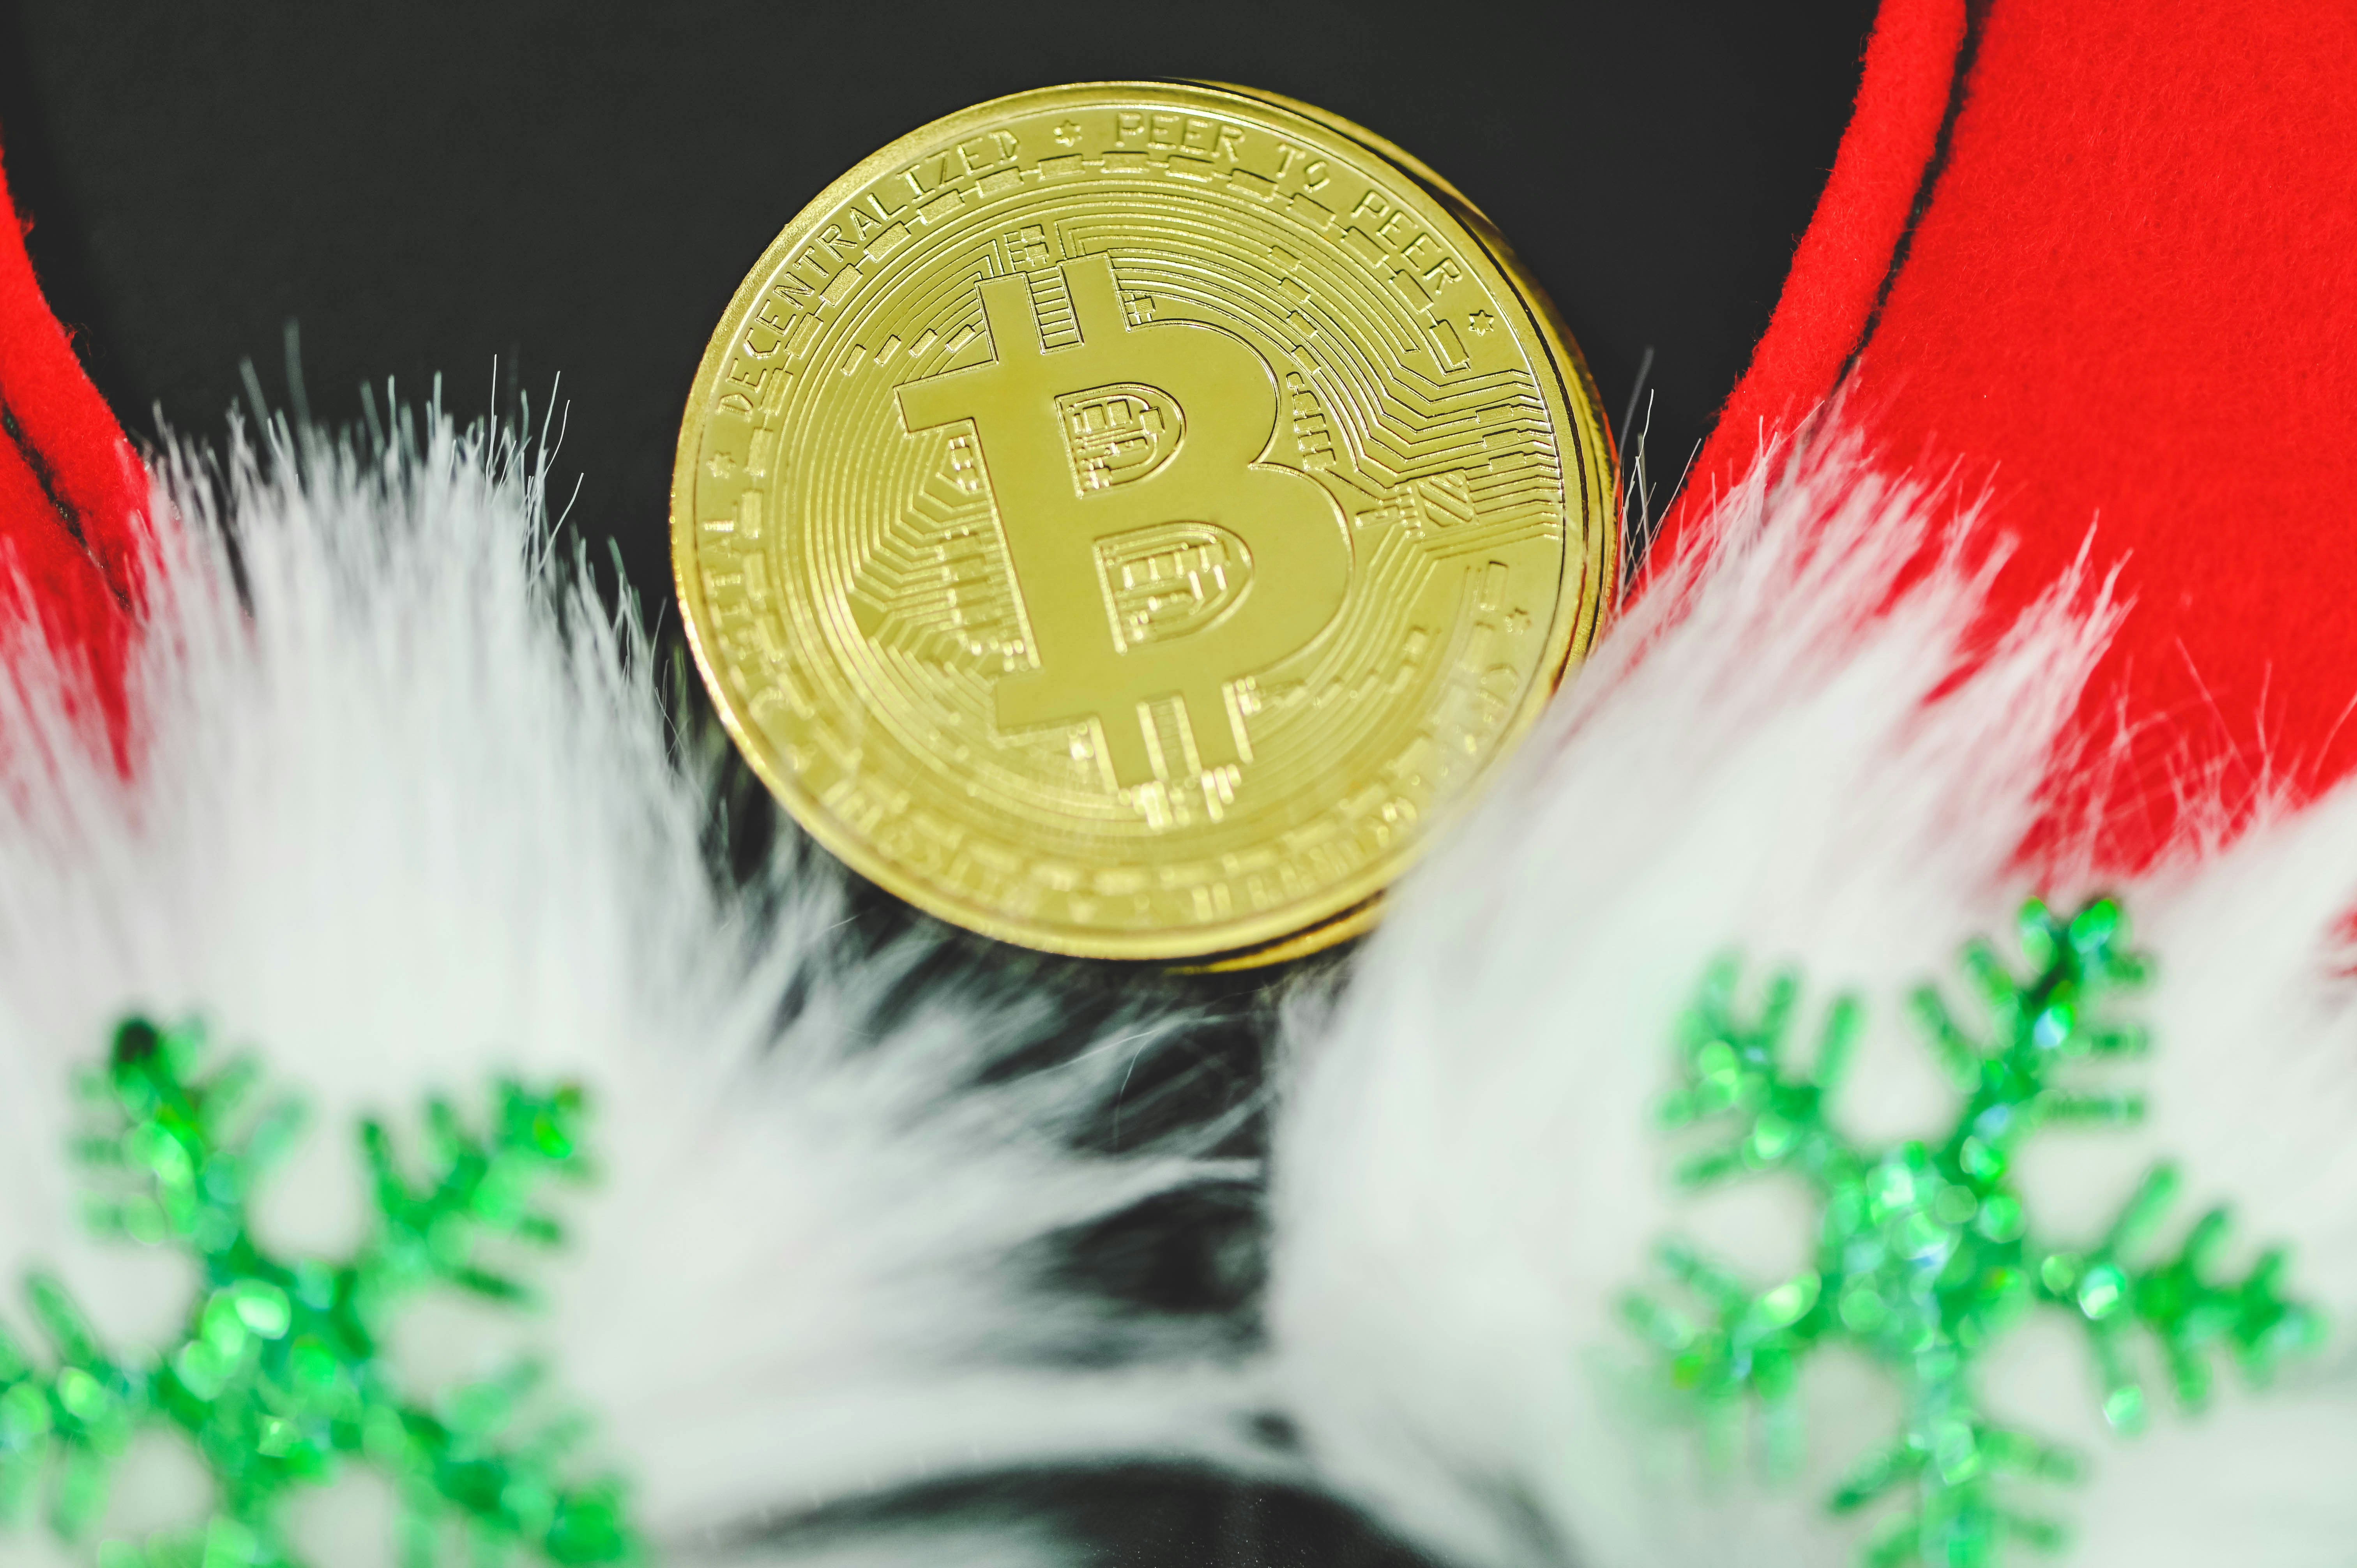 A single Bitcoin in the middle of two ornaments